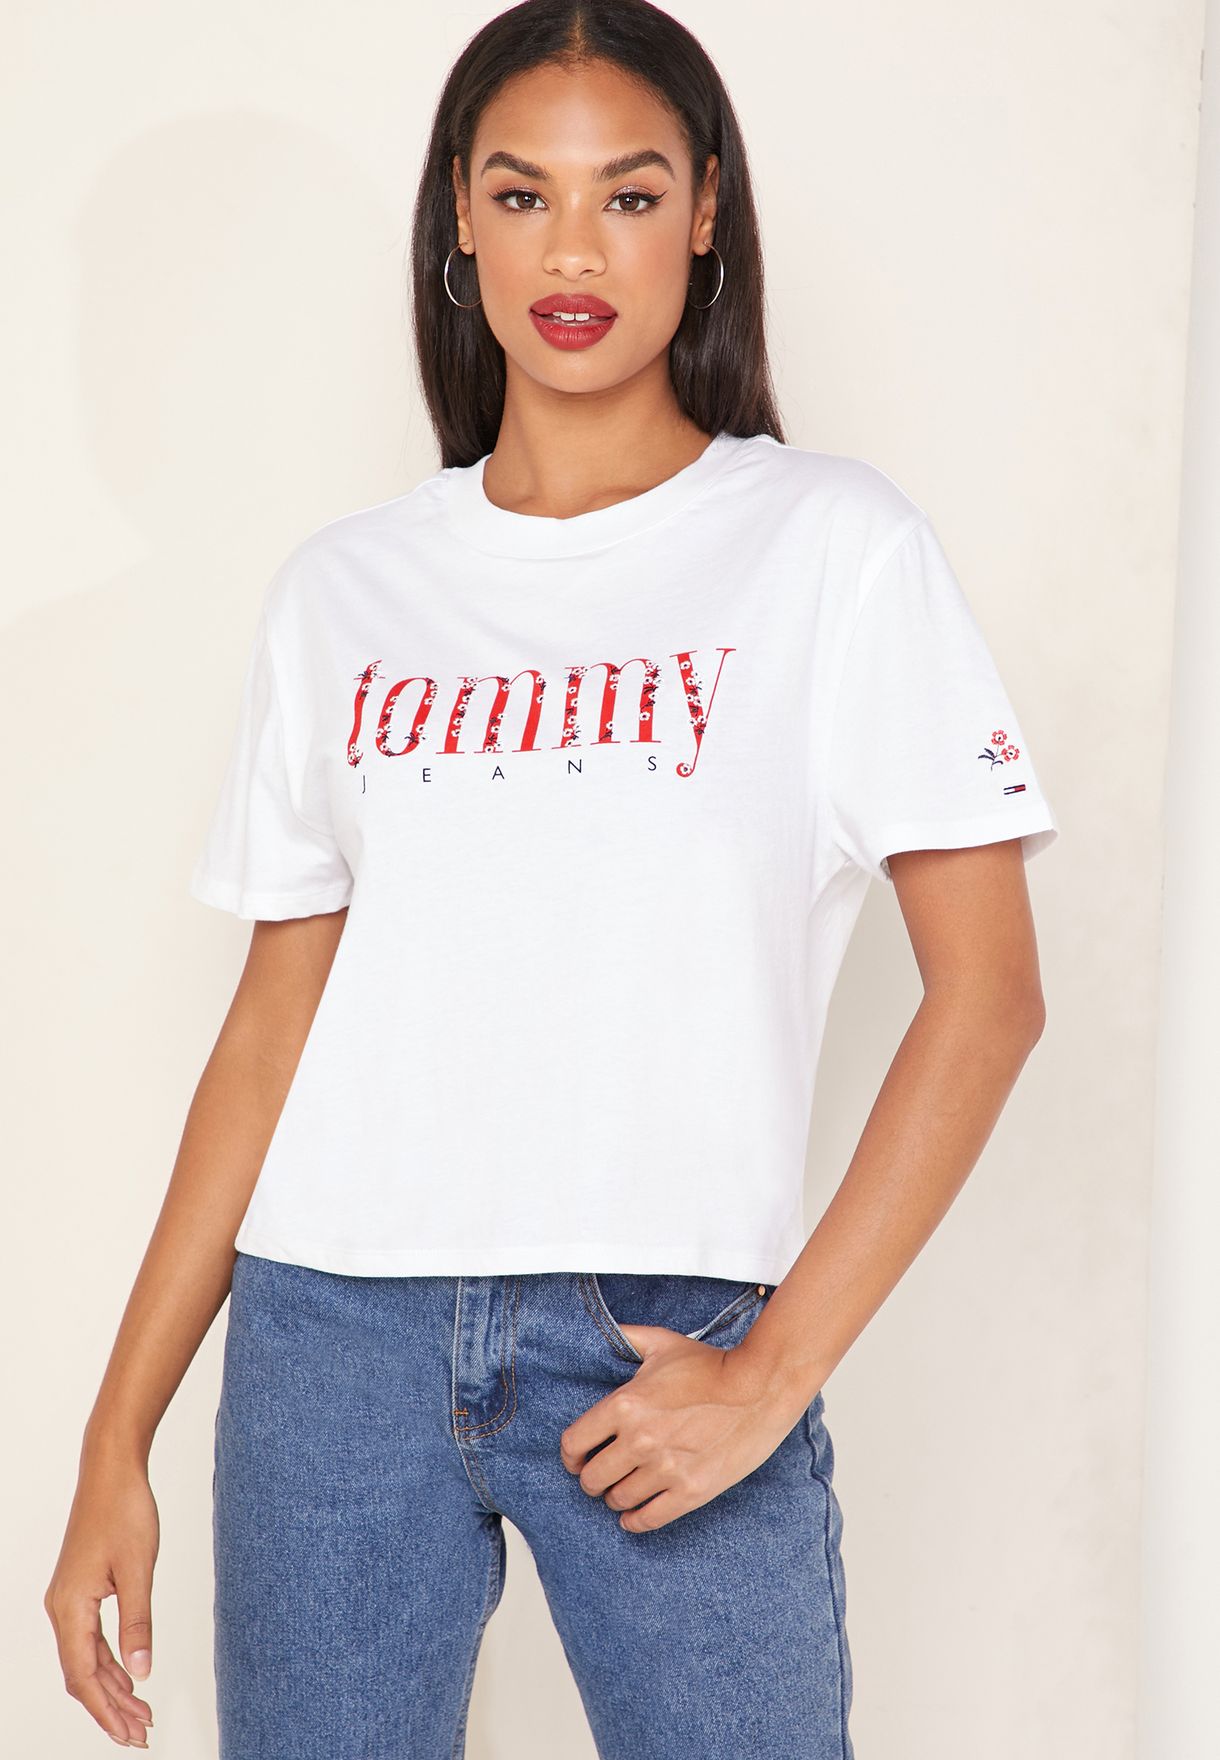 tommy jeans embroidered logo tee